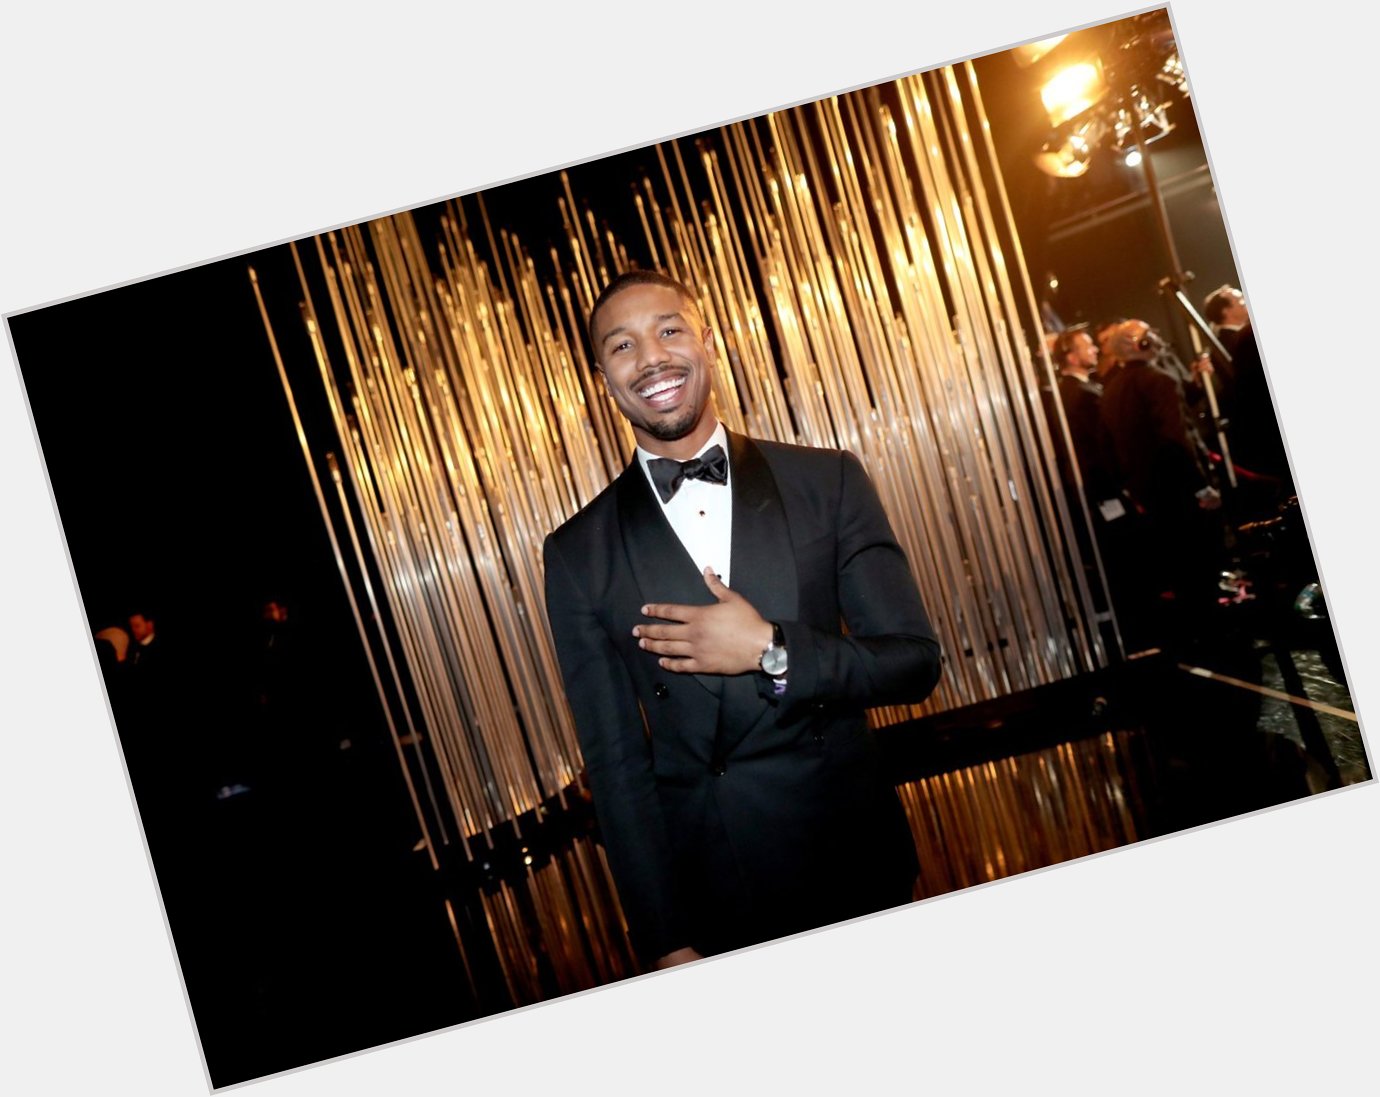 Happy 30th birthday to Michael B. Jordan, owner of possibly the most joyous IMDb profile photo. 